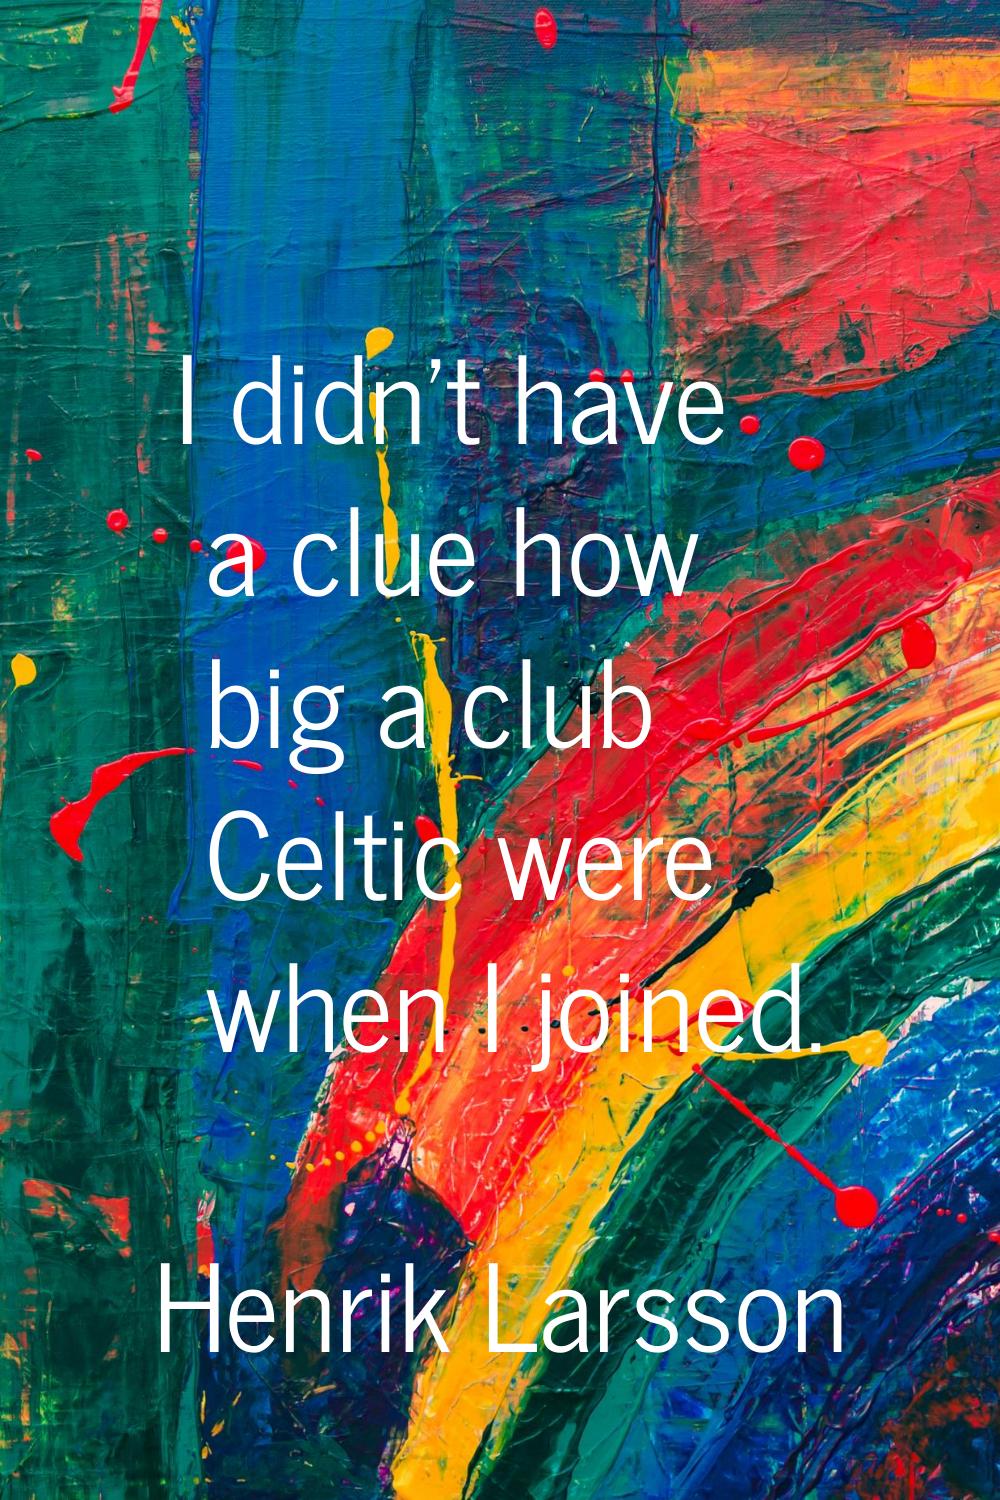 I didn't have a clue how big a club Celtic were when I joined.